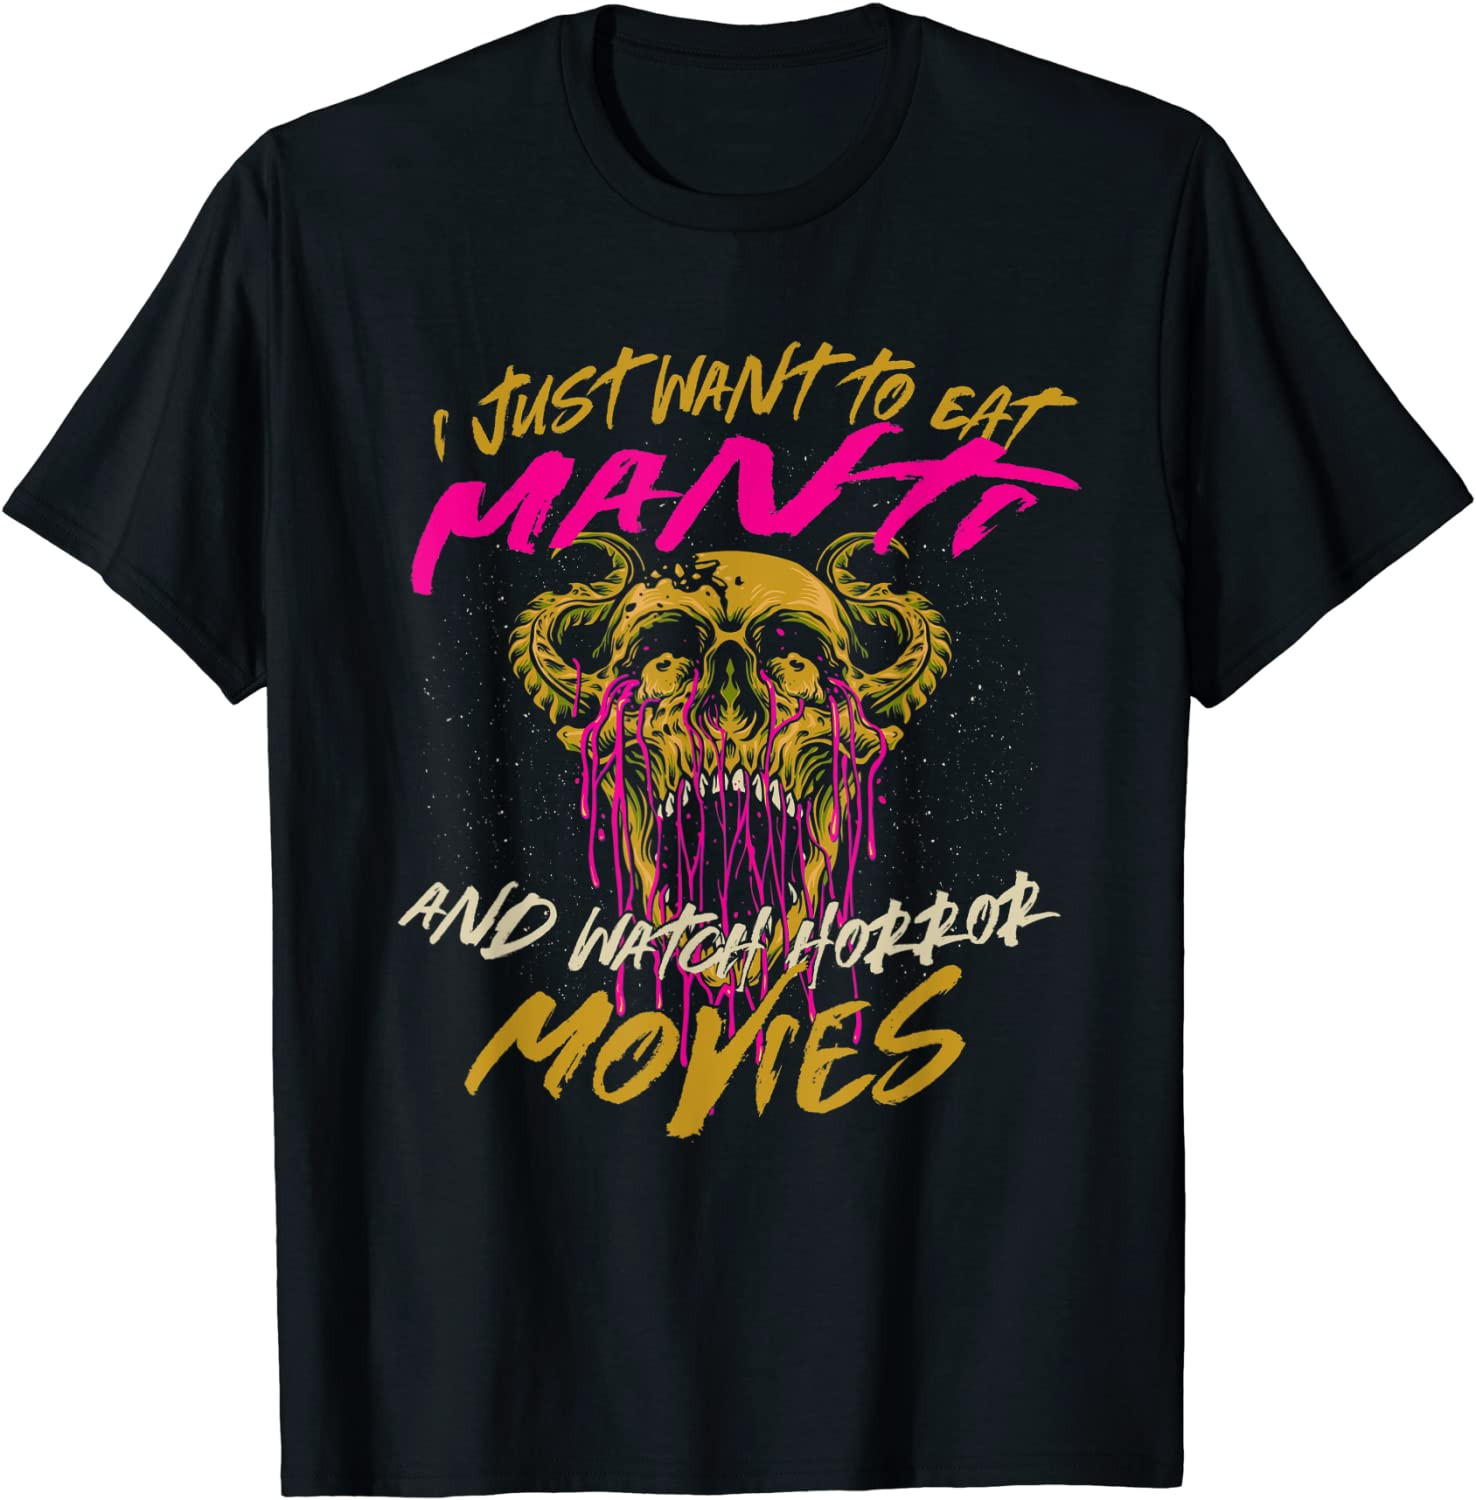 Eat Manti And Watch Horror Movies Comfort Food Manty T-Shirt